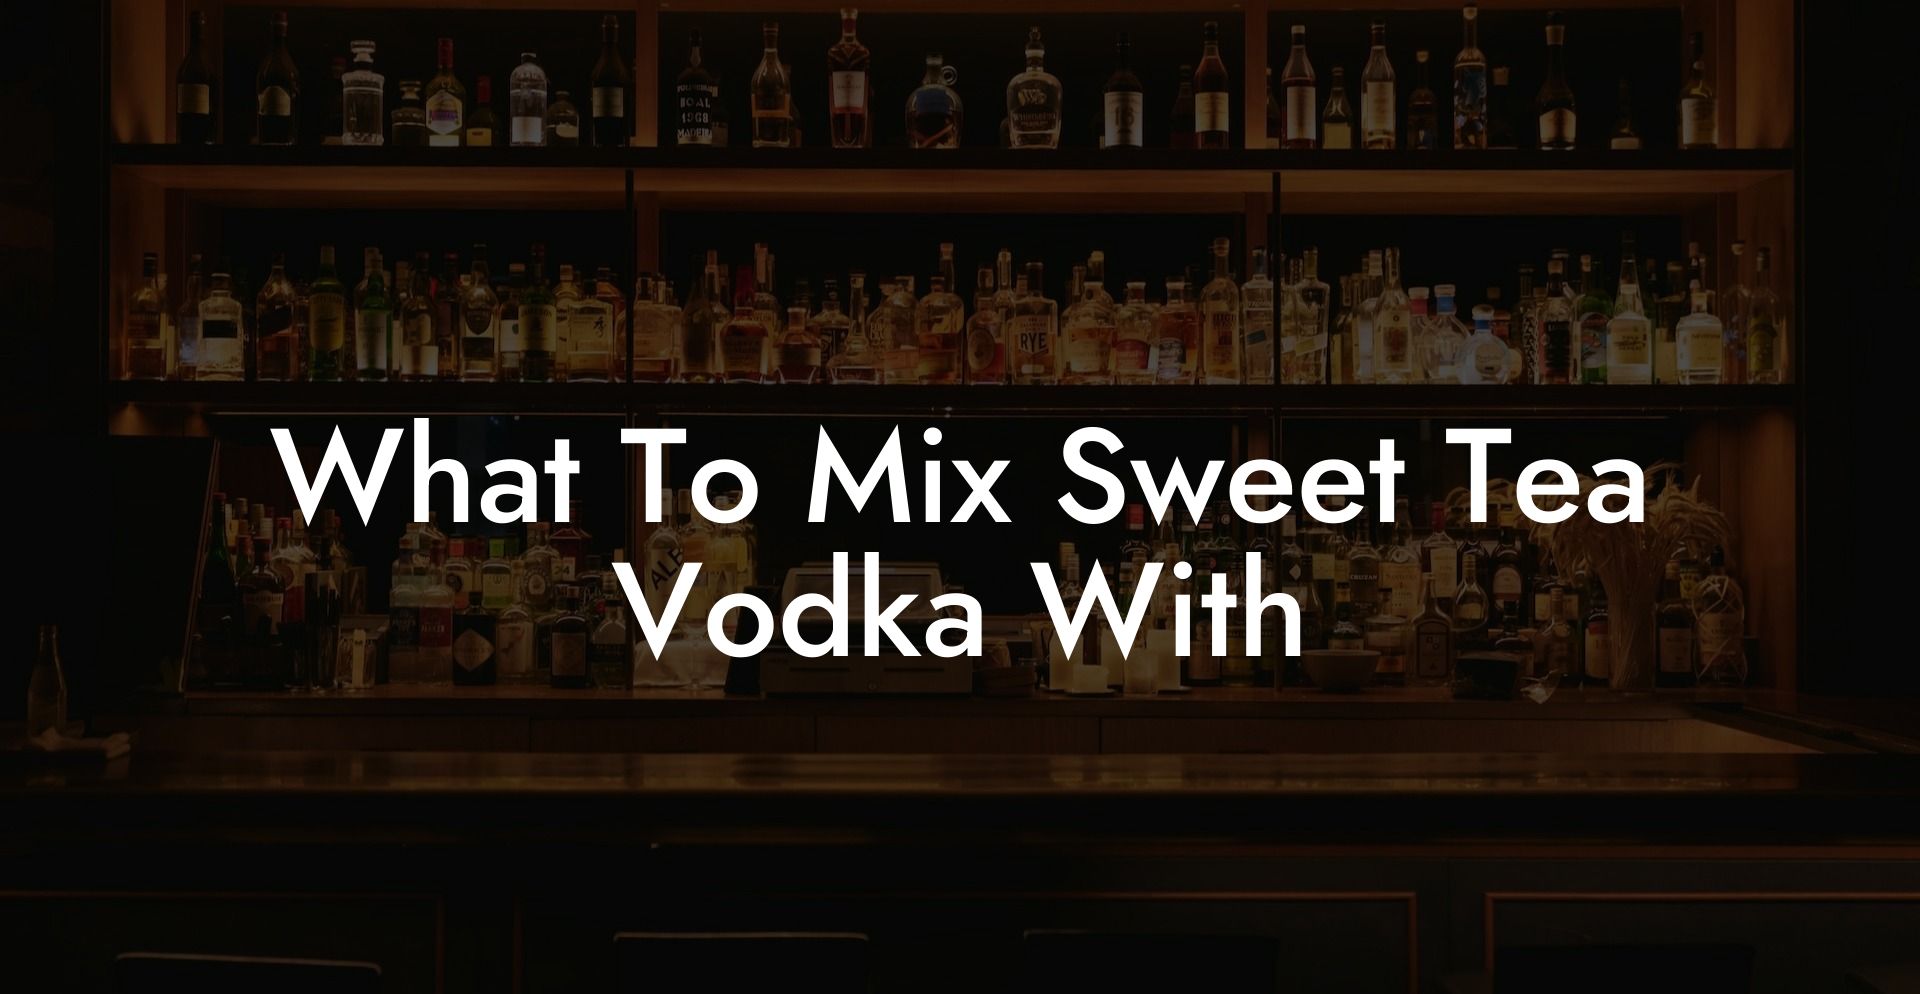 What To Mix Sweet Tea Vodka With